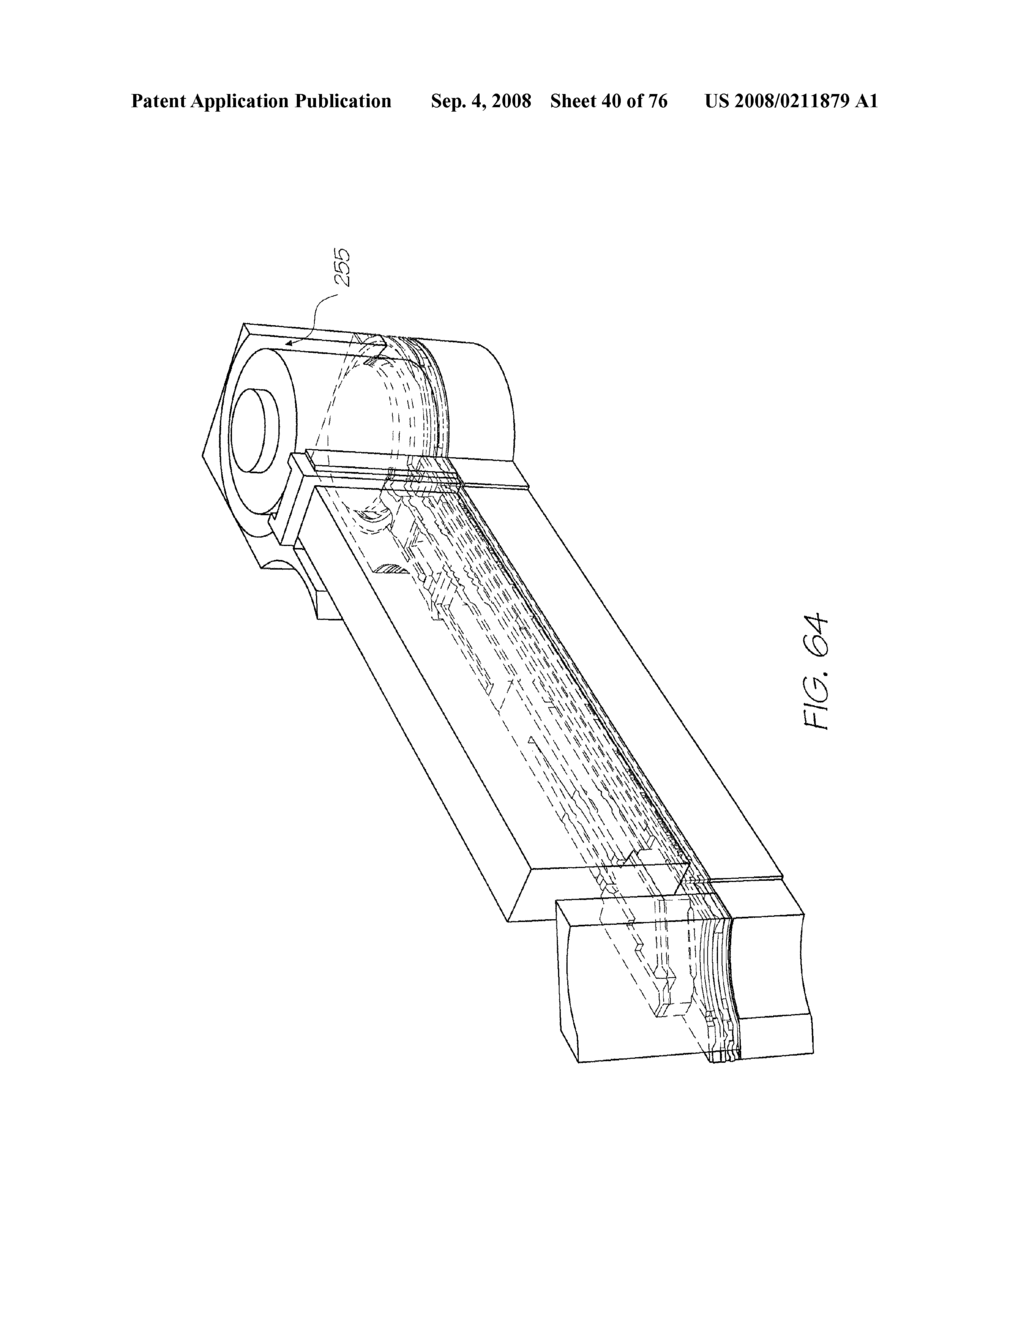 Pagewidth inkjet printhead assembly with nozzle arrangements having actuator arms configured to be in thermal balance when in a quiescent state - diagram, schematic, and image 41